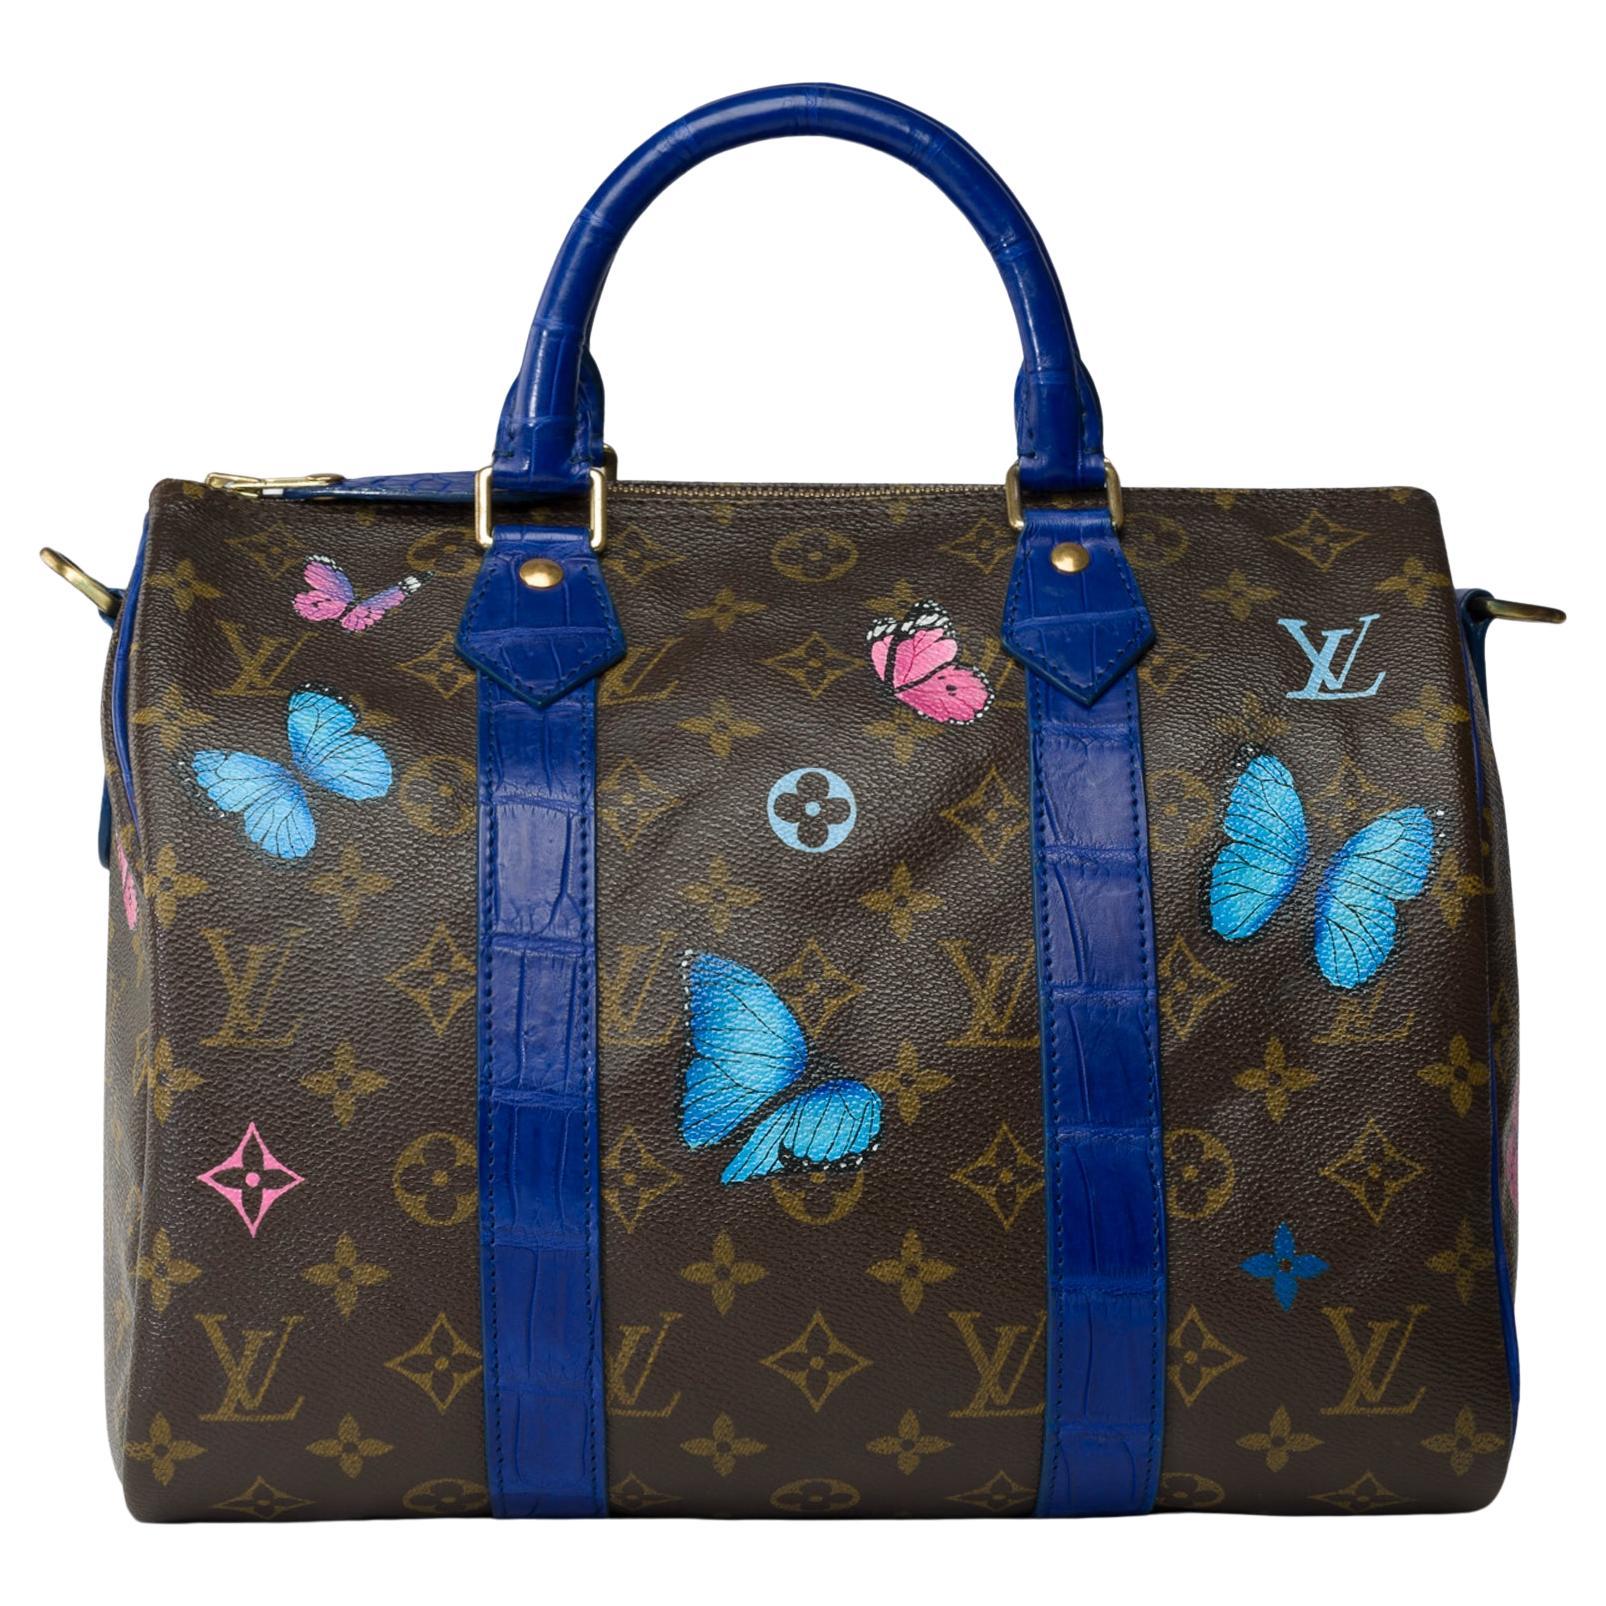 How can you tell if a Louis Vuitton purse is real?